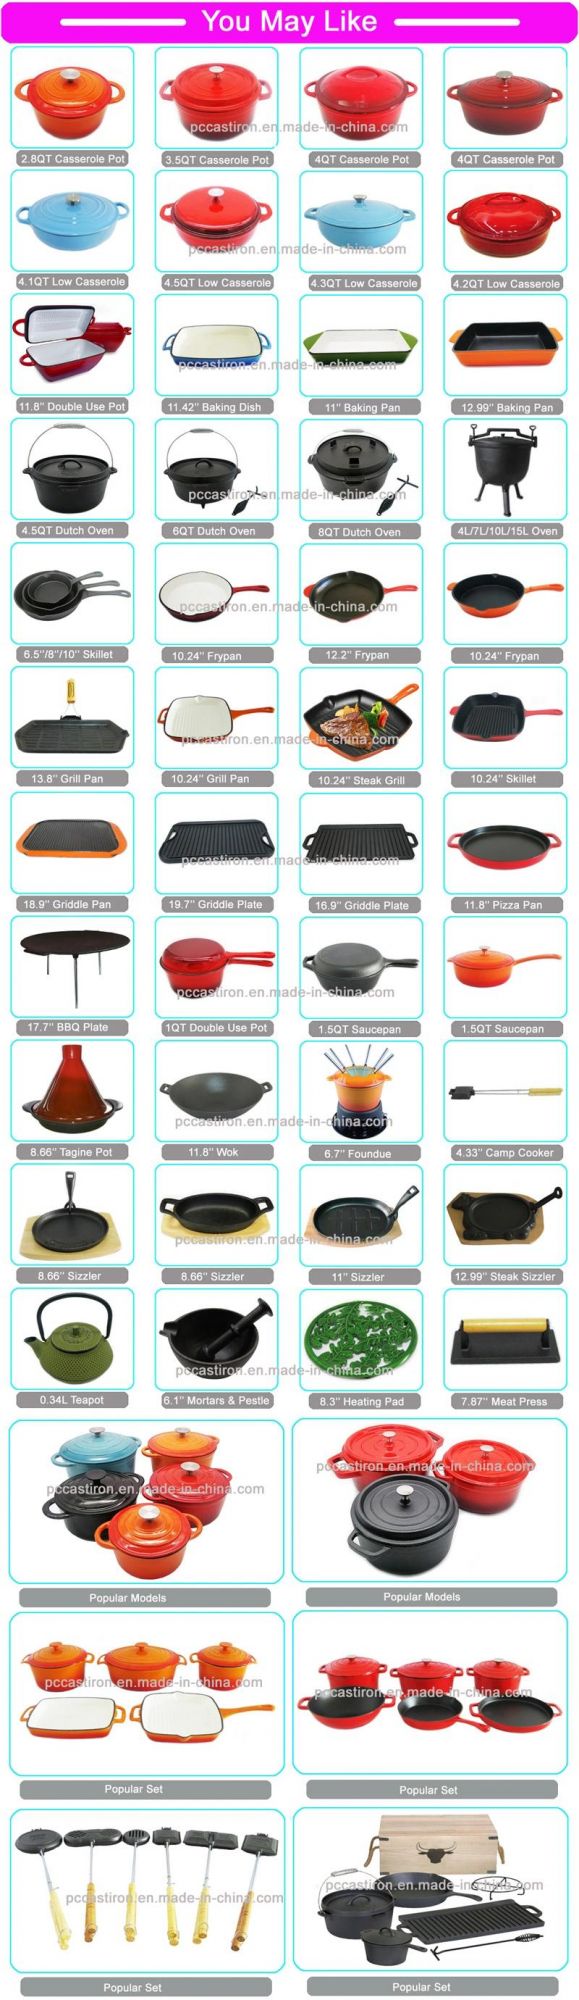 Customized 14.5X10.5cm Stone Mortar and Pestle Factory SGS, FDA LFGB Approved